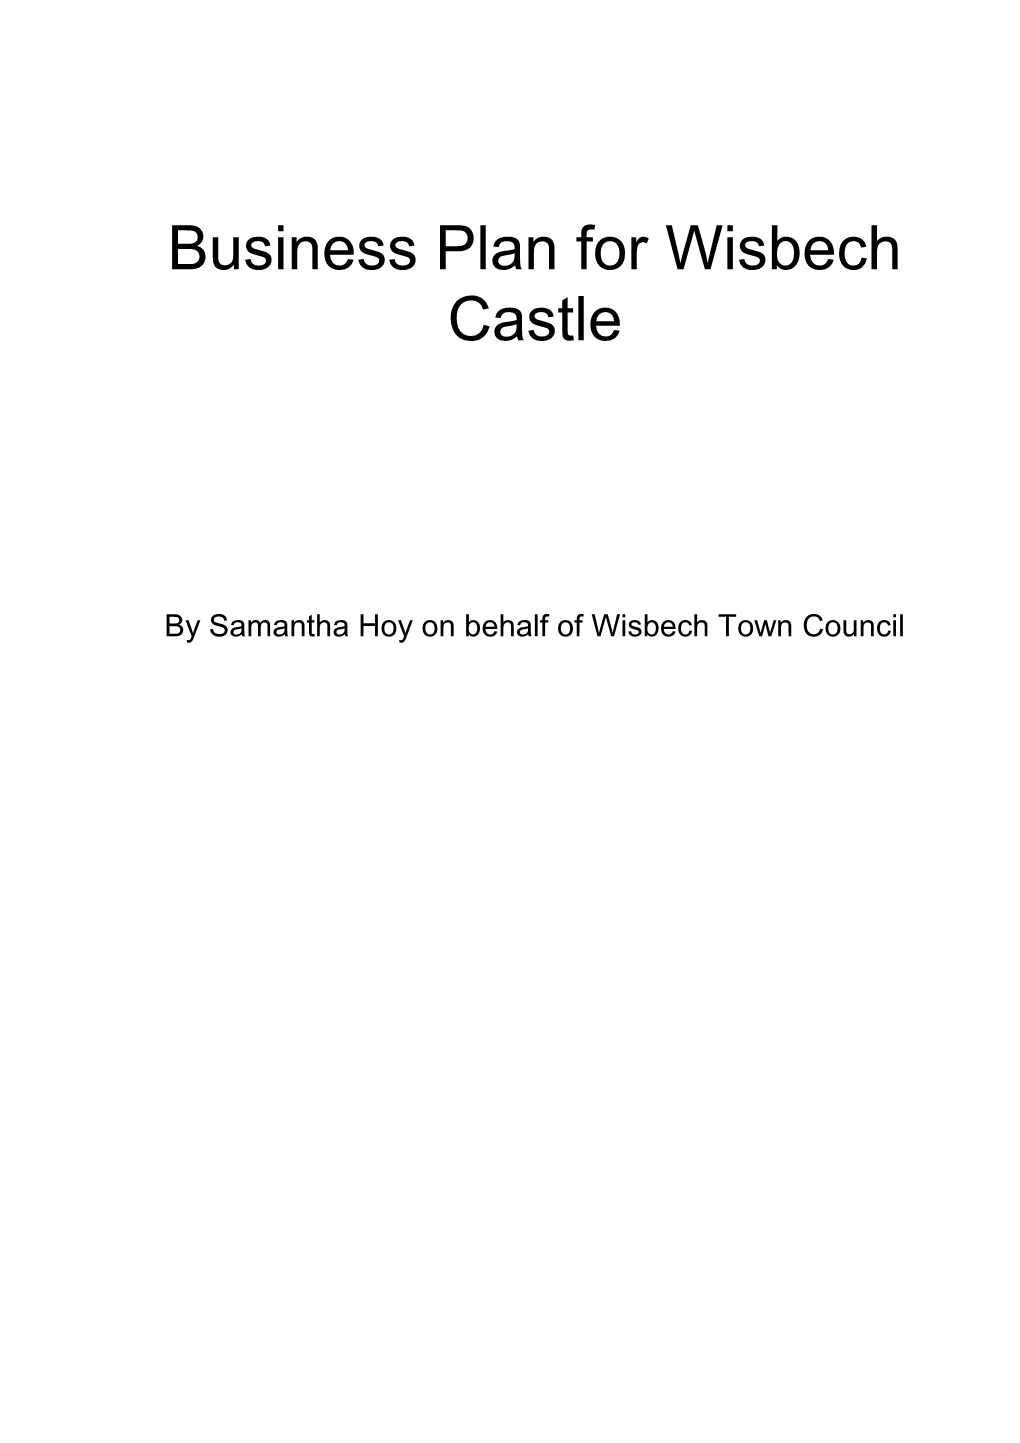 Business Plan for Wisbech Castle